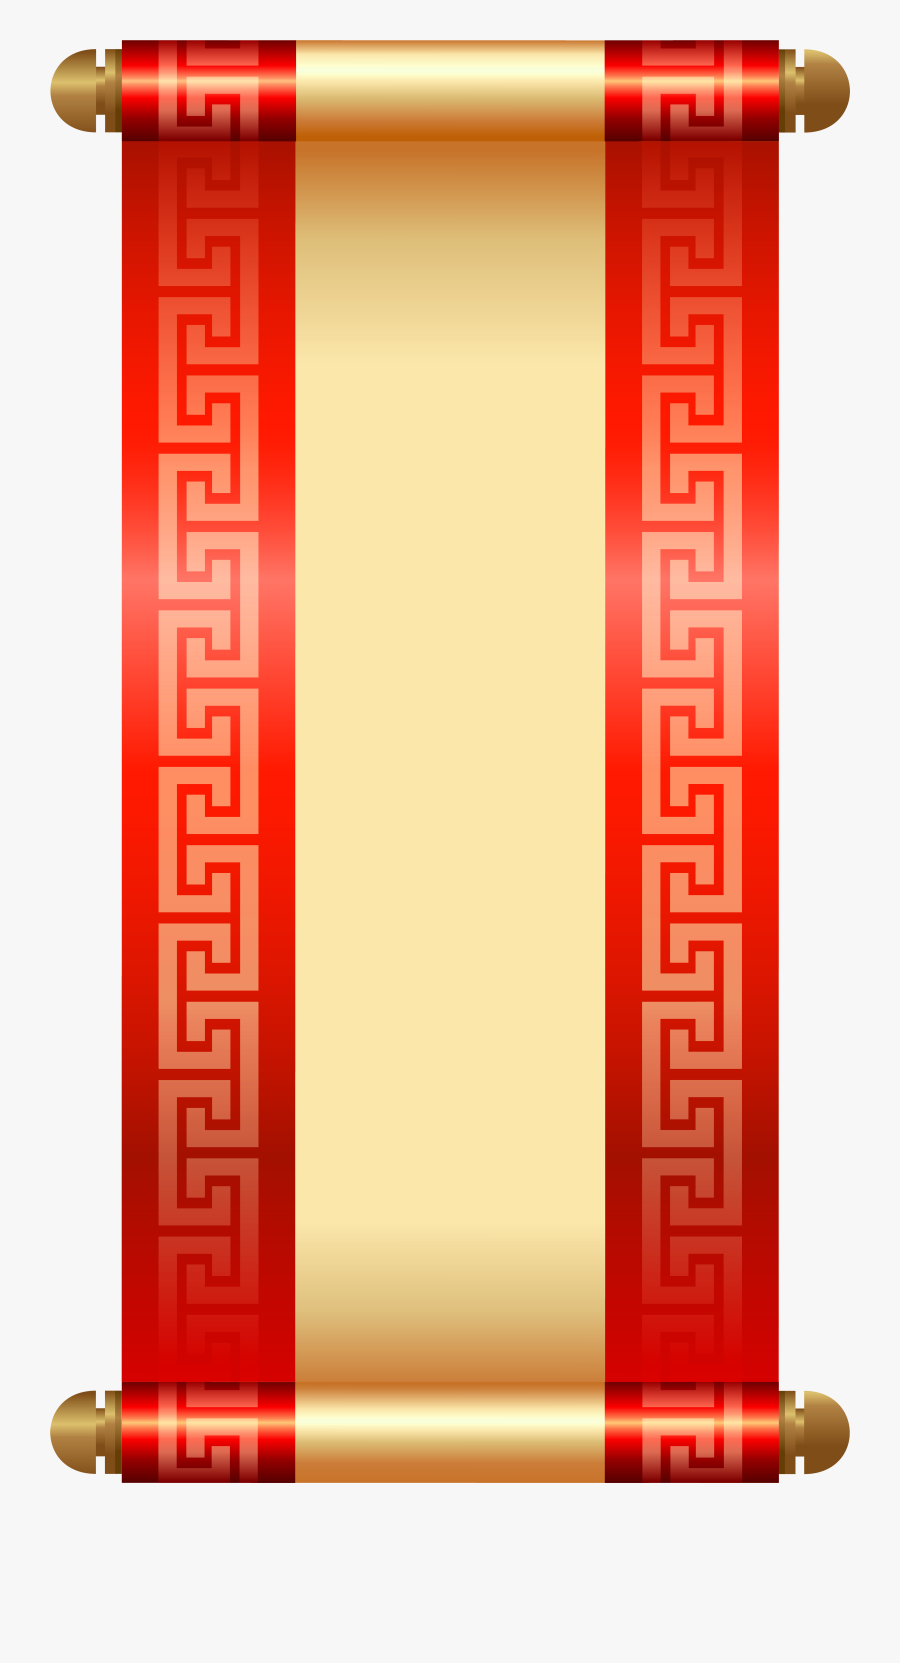 Chinese Scroll Png Clip Art - Chinese Scroll Transparent Background, Transparent Clipart